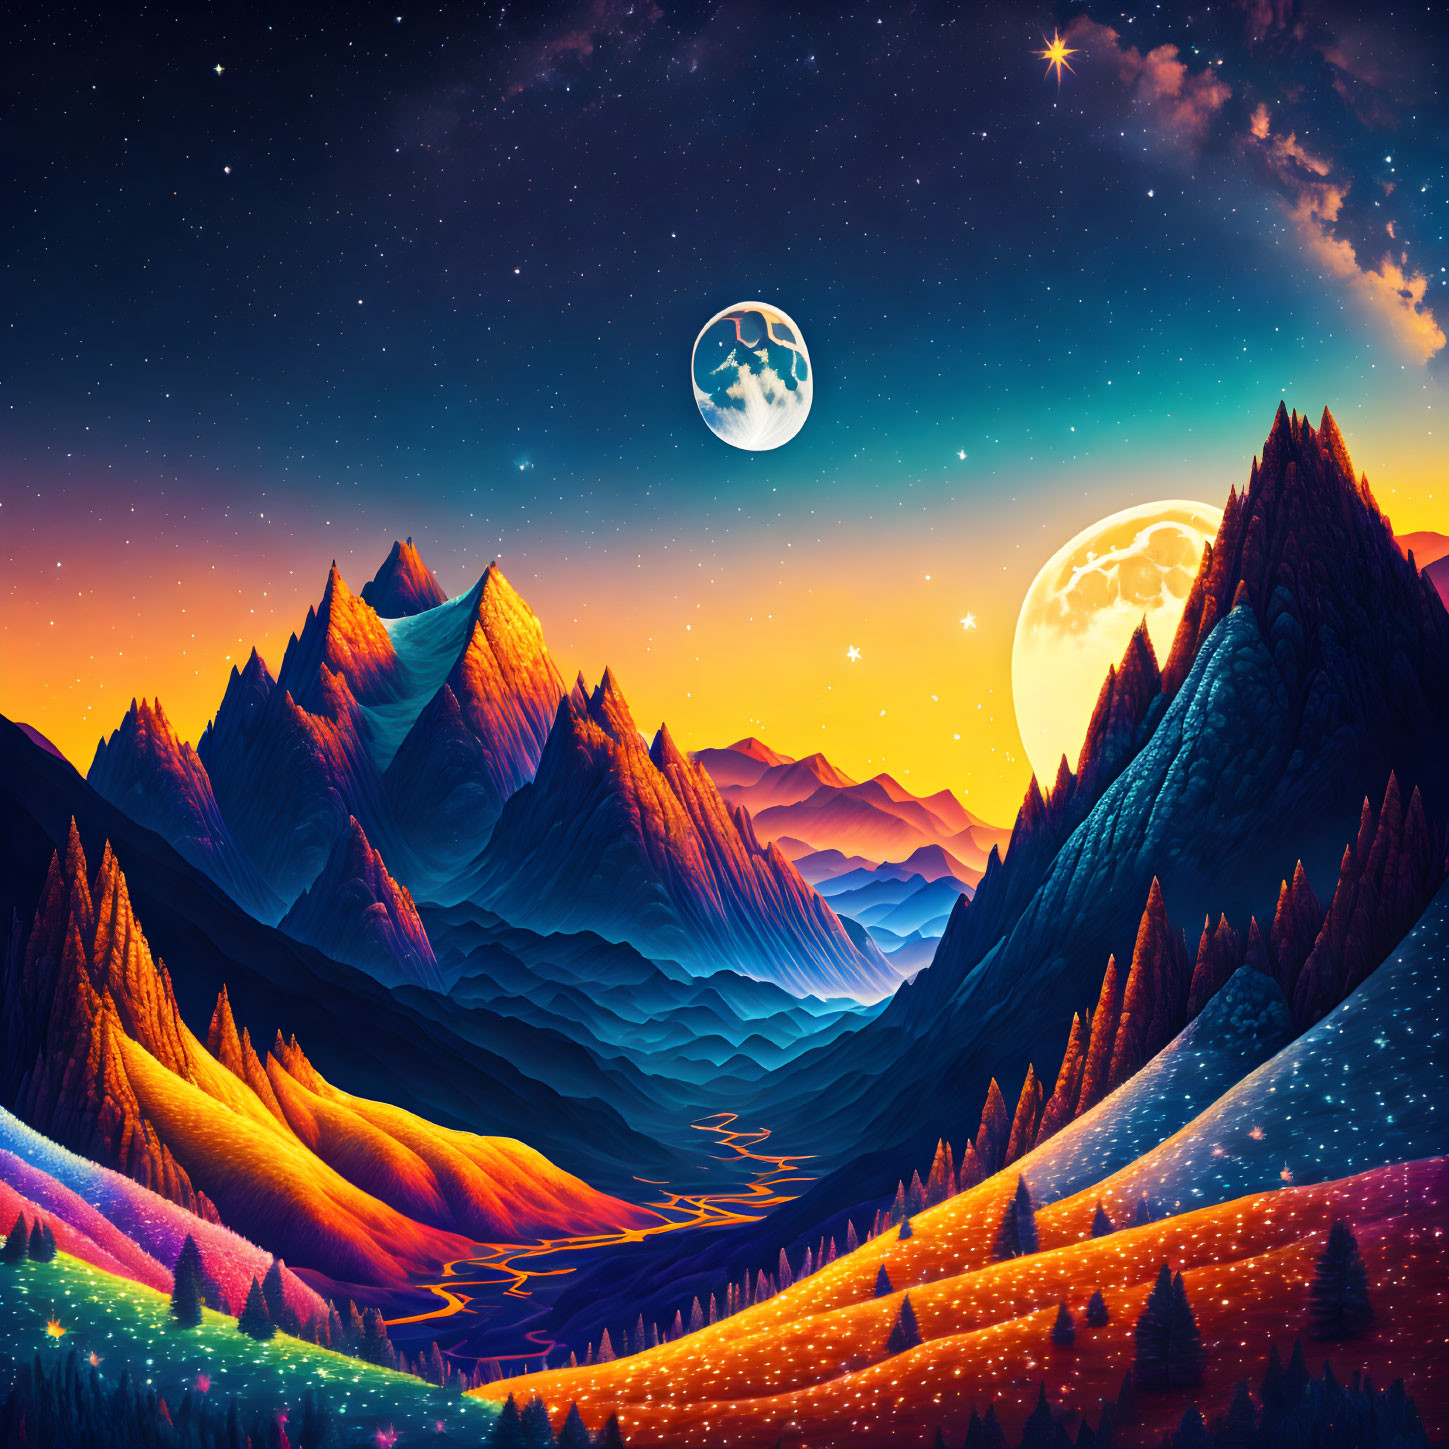 Colorful Dual Moon Landscape with Mountains, River, and Starry Sky